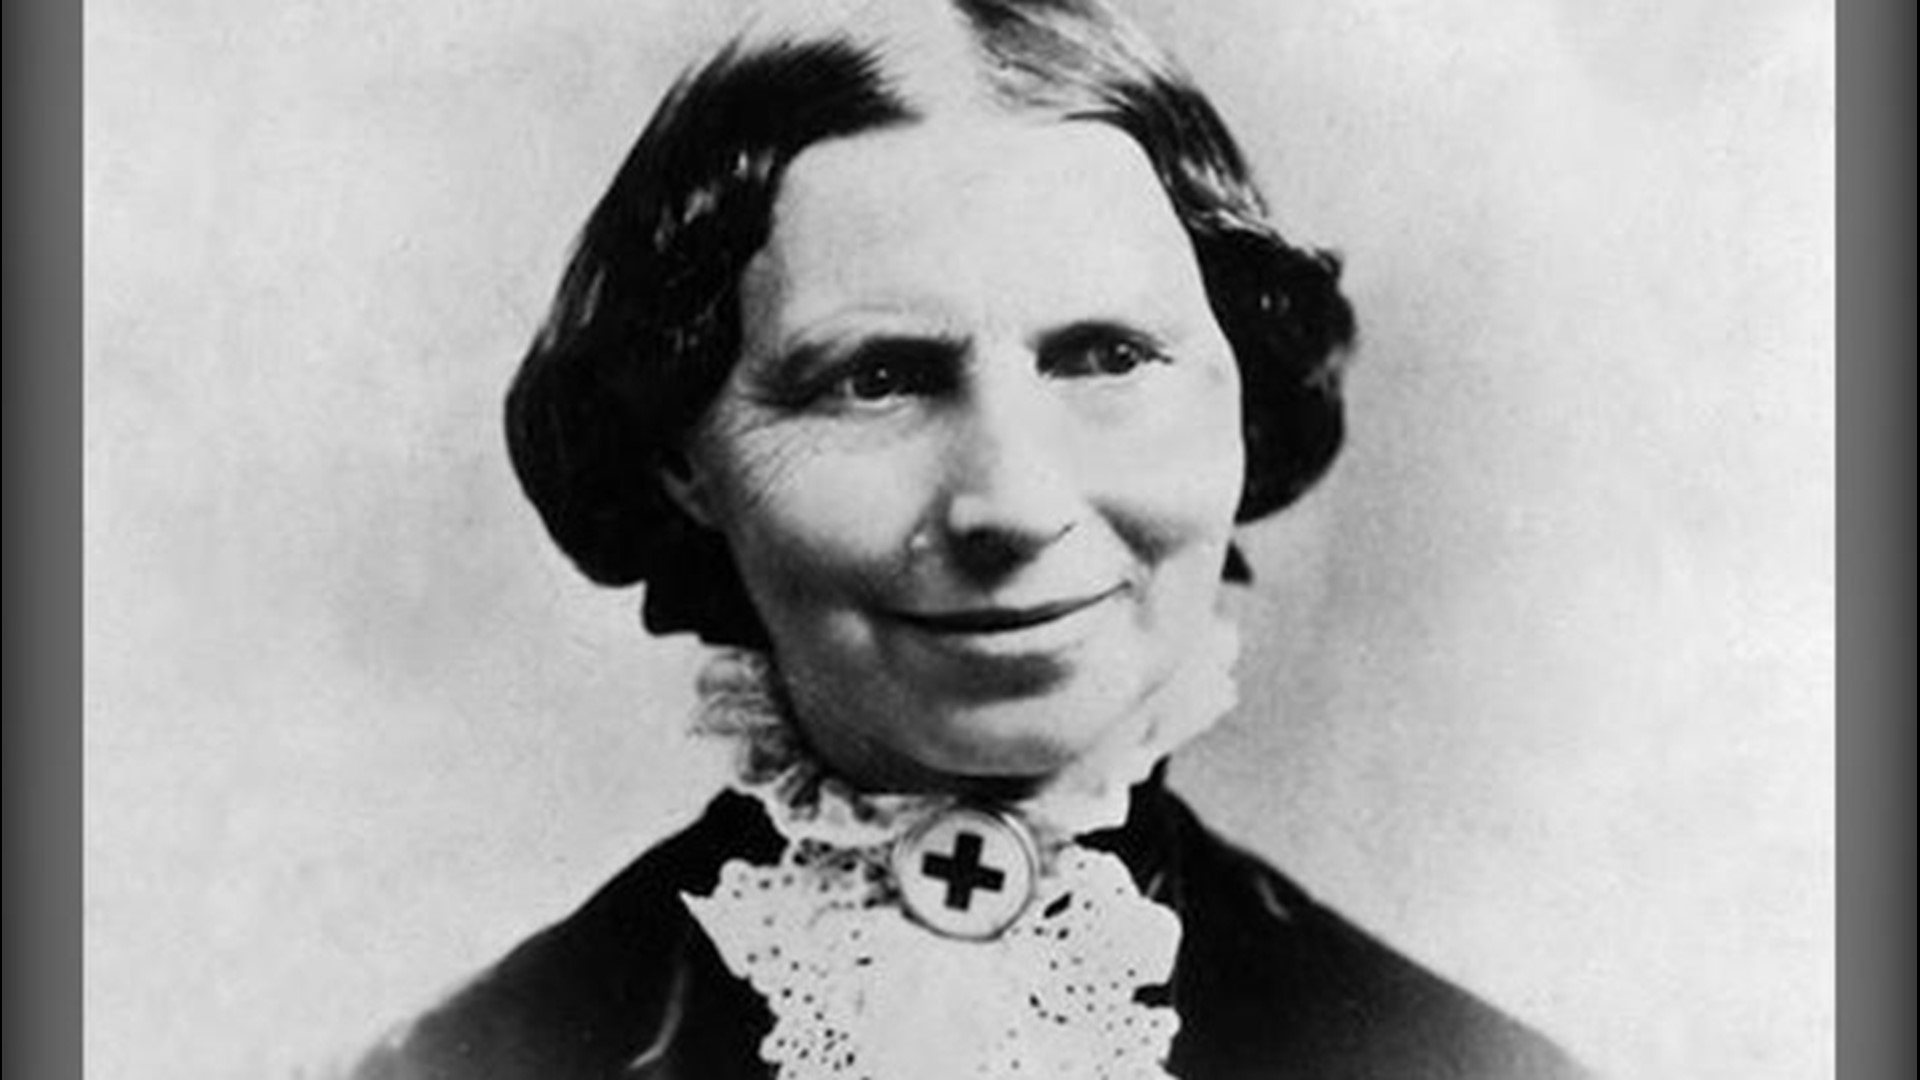 In times of distress, including hurricanes, tornadoes and floods, the American Red Cross is often on scene helping people. It all started with Clara Barton and the Civil War more than 160 years ago.